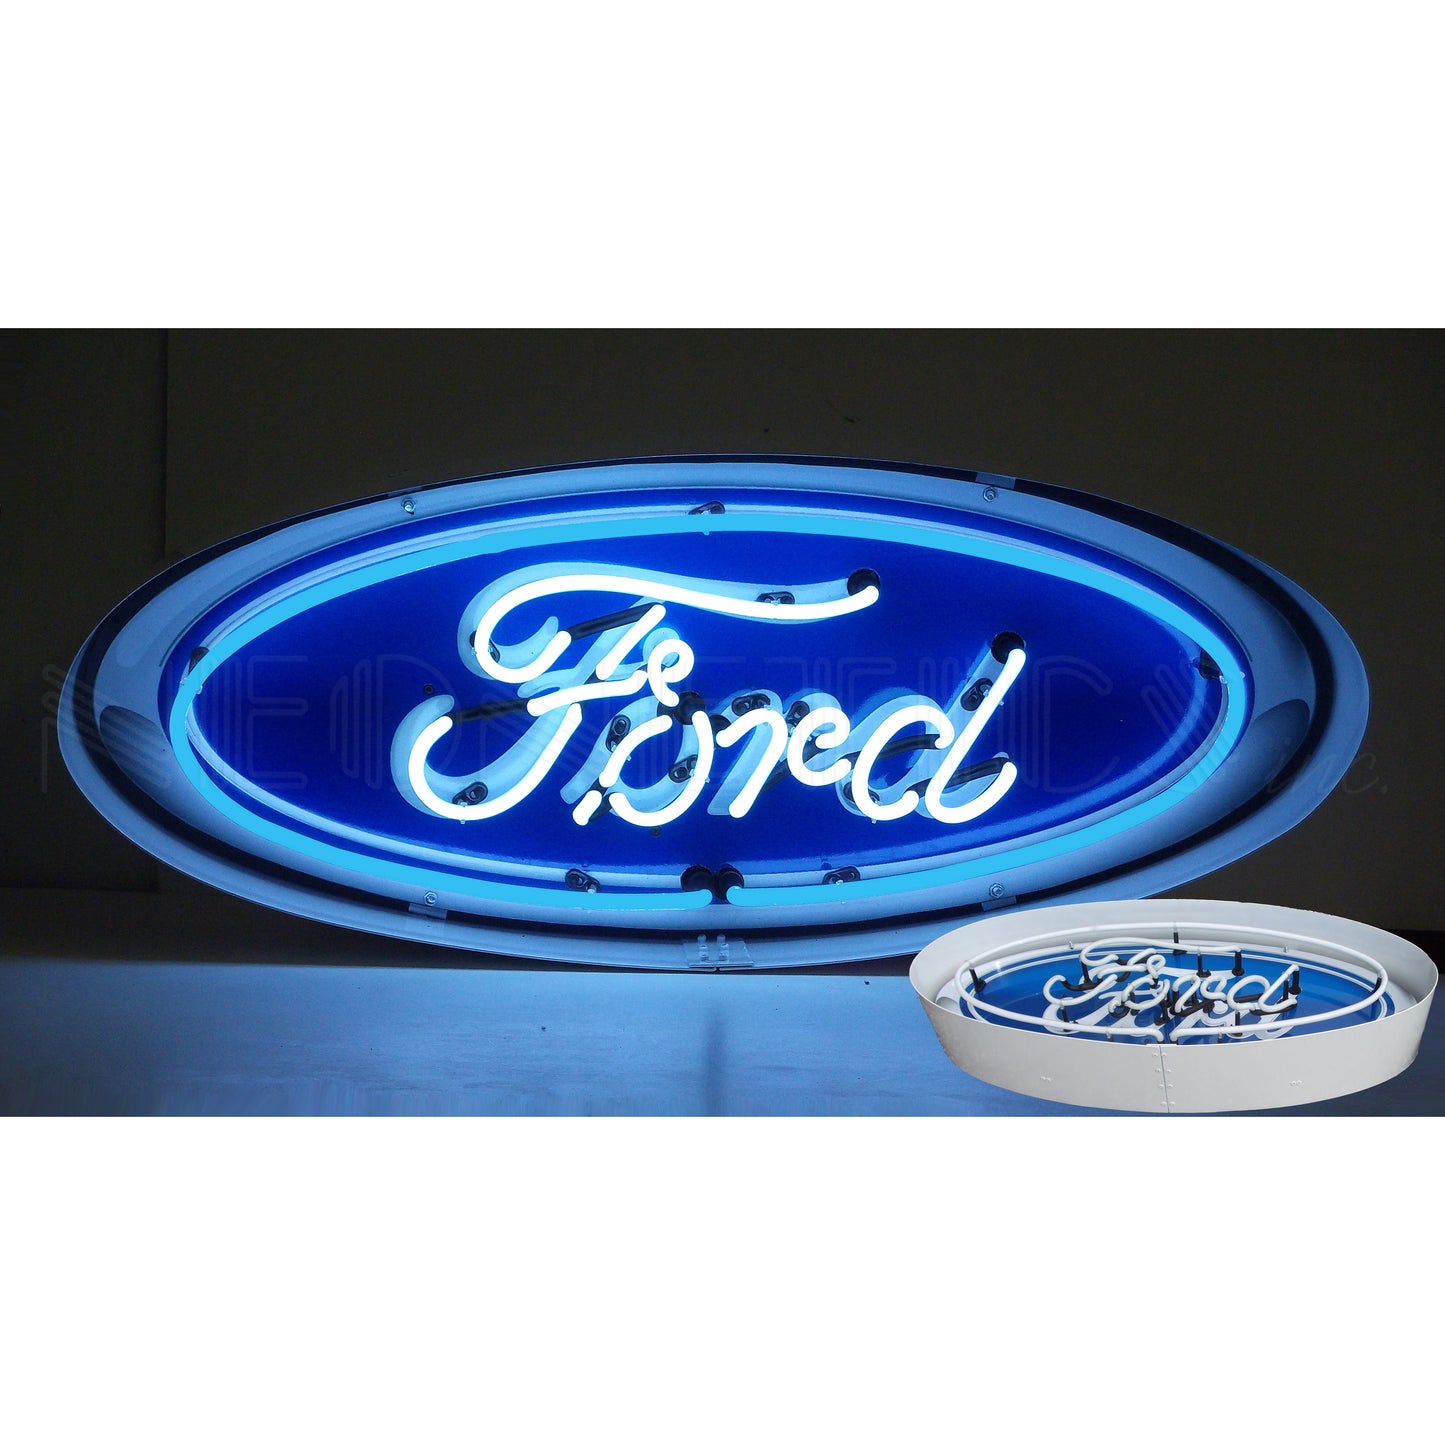 Ford Oval Neon Sign in a Steel Can